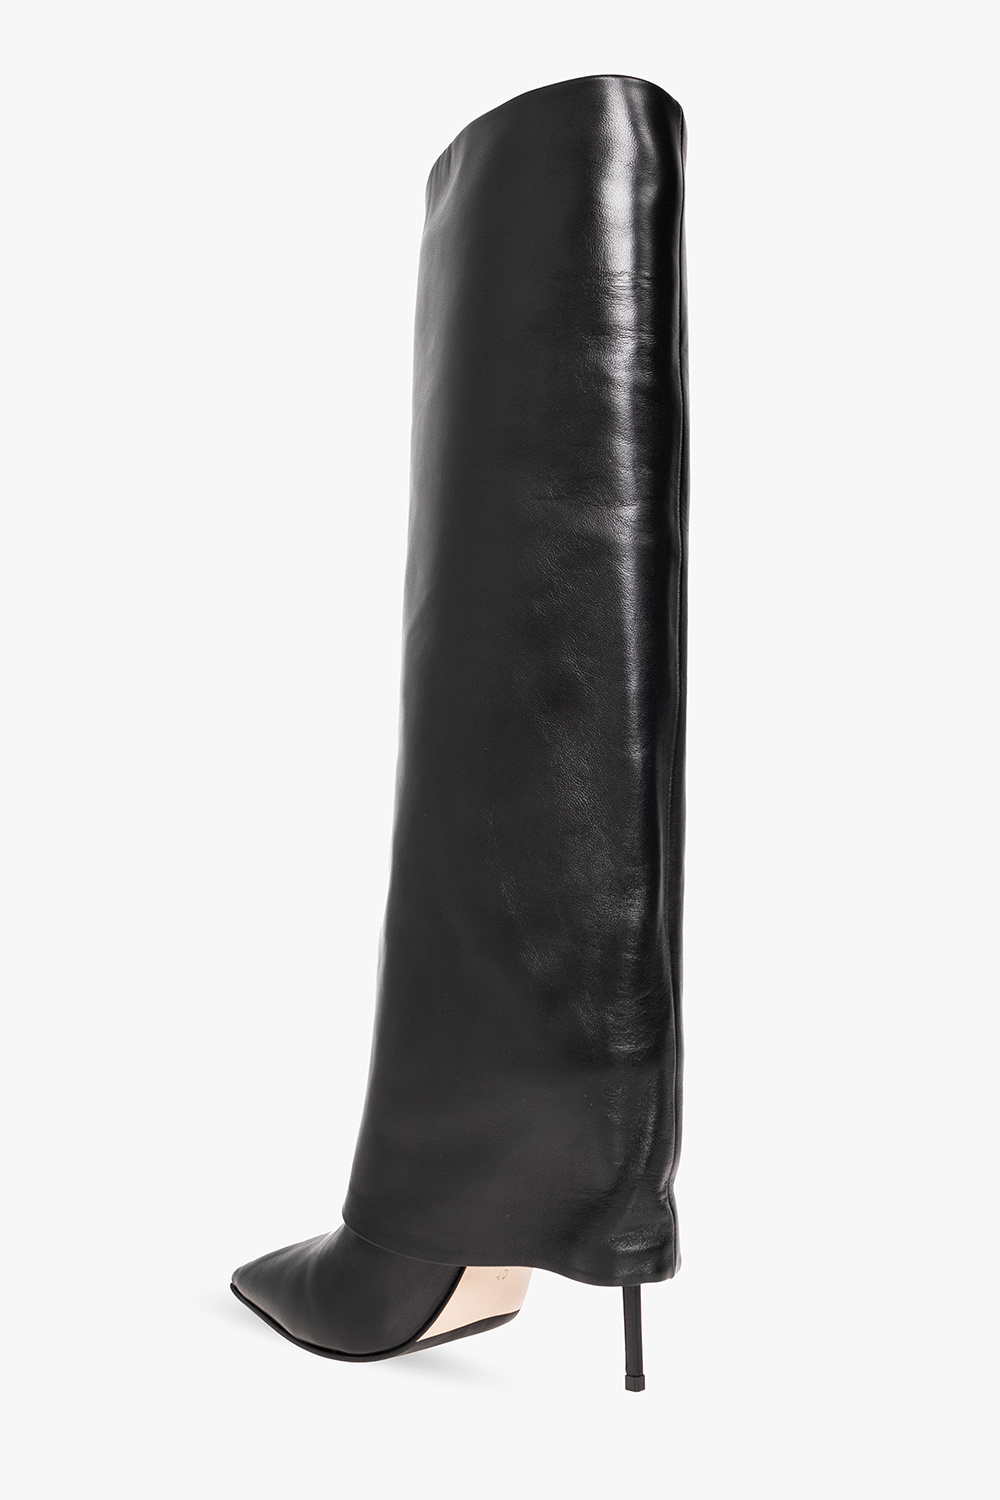 Le Silla ‘Andy’ heeled boots